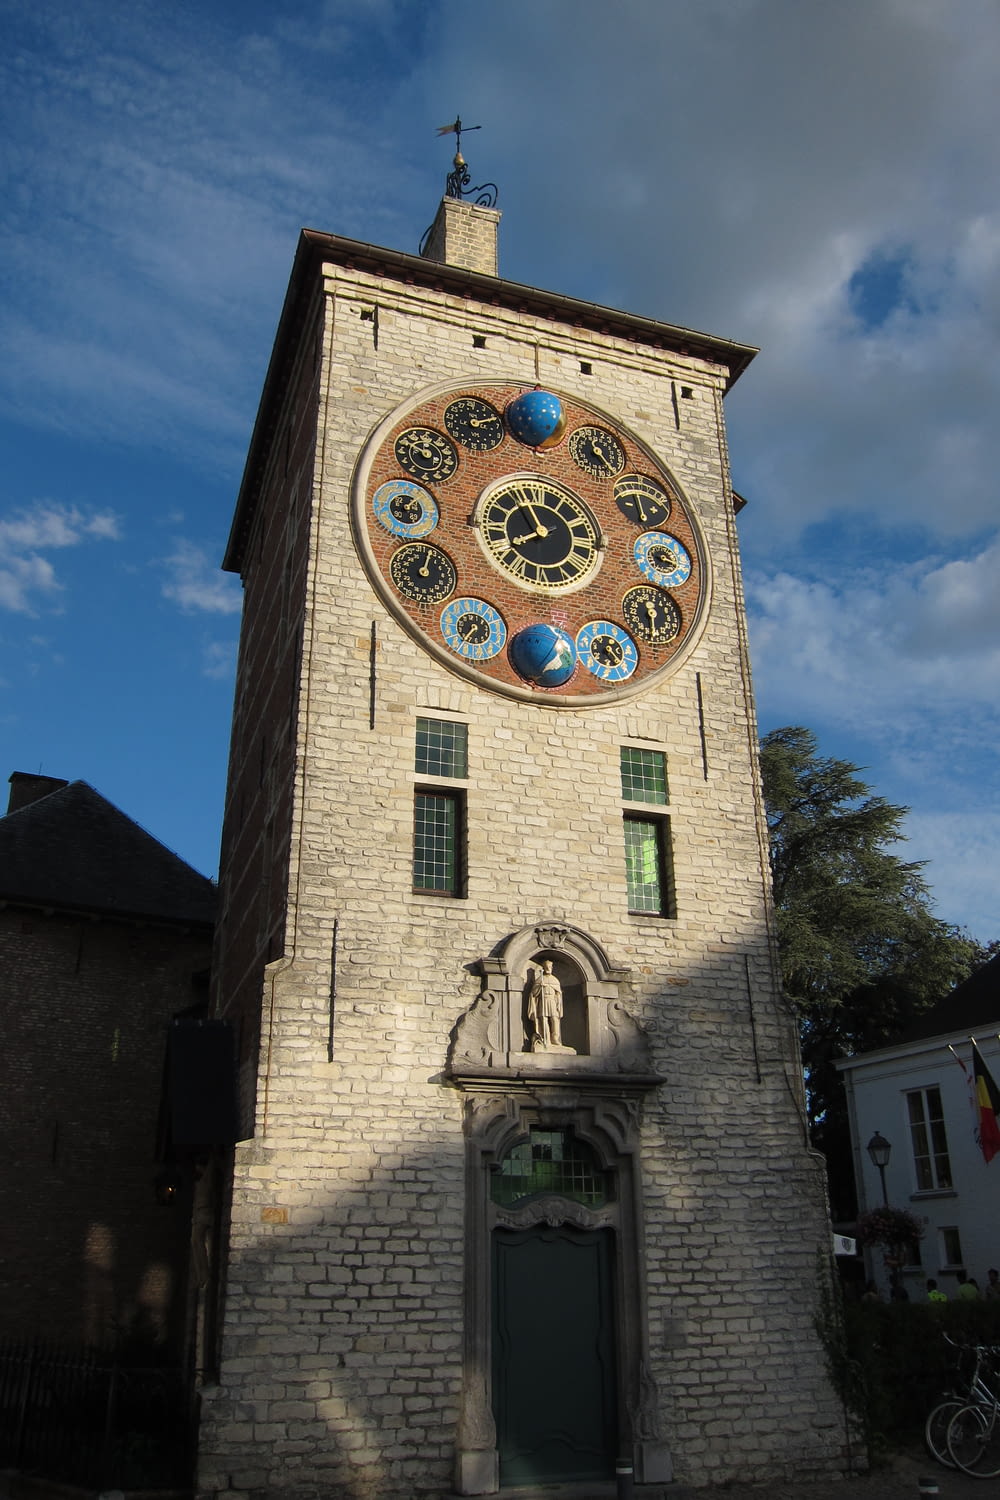 a large clock on a brick building